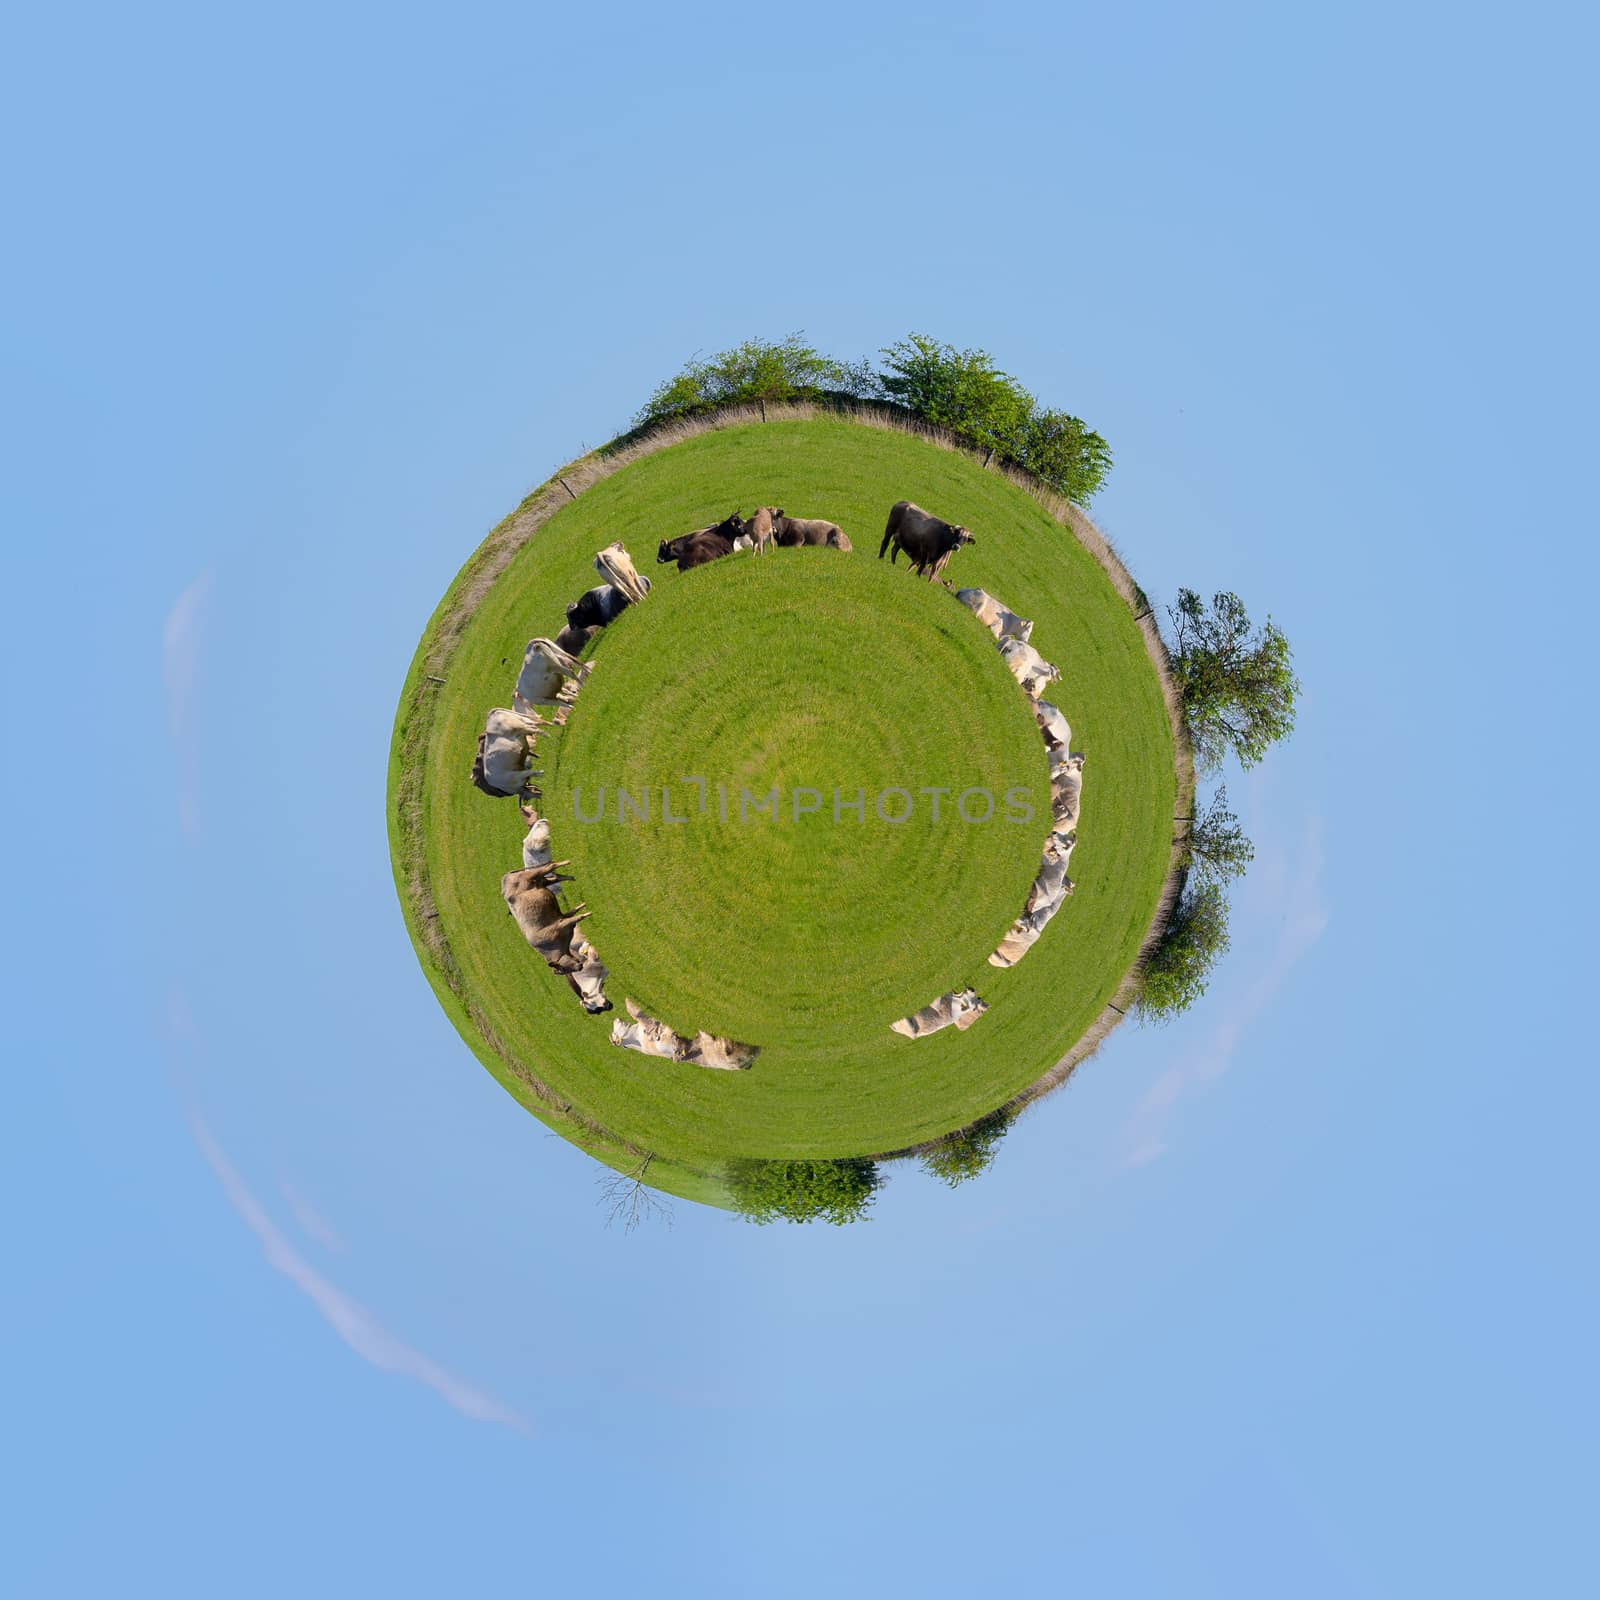 Herd of cows on green grass, rural scene, countryside tranquil landscape. Beautiful Little planet ecology concept. Tiny green planet